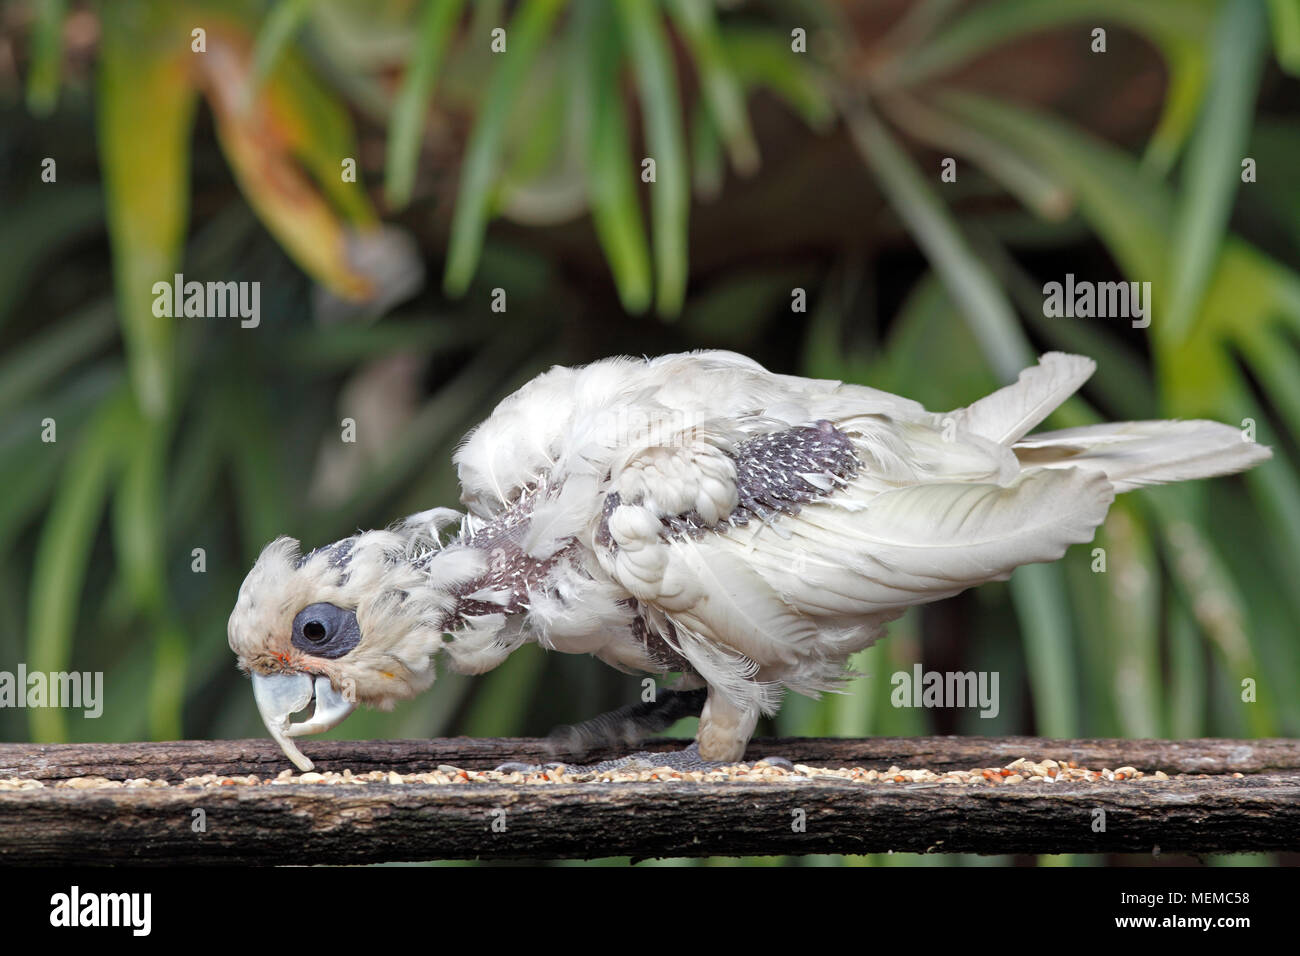 Little Corella, Cacatua sanguinea, with an advanced case of Psittacine Beak and Feather Disease, PBFD, or Avian Circovirus, showing the feather loss,  Stock Photo